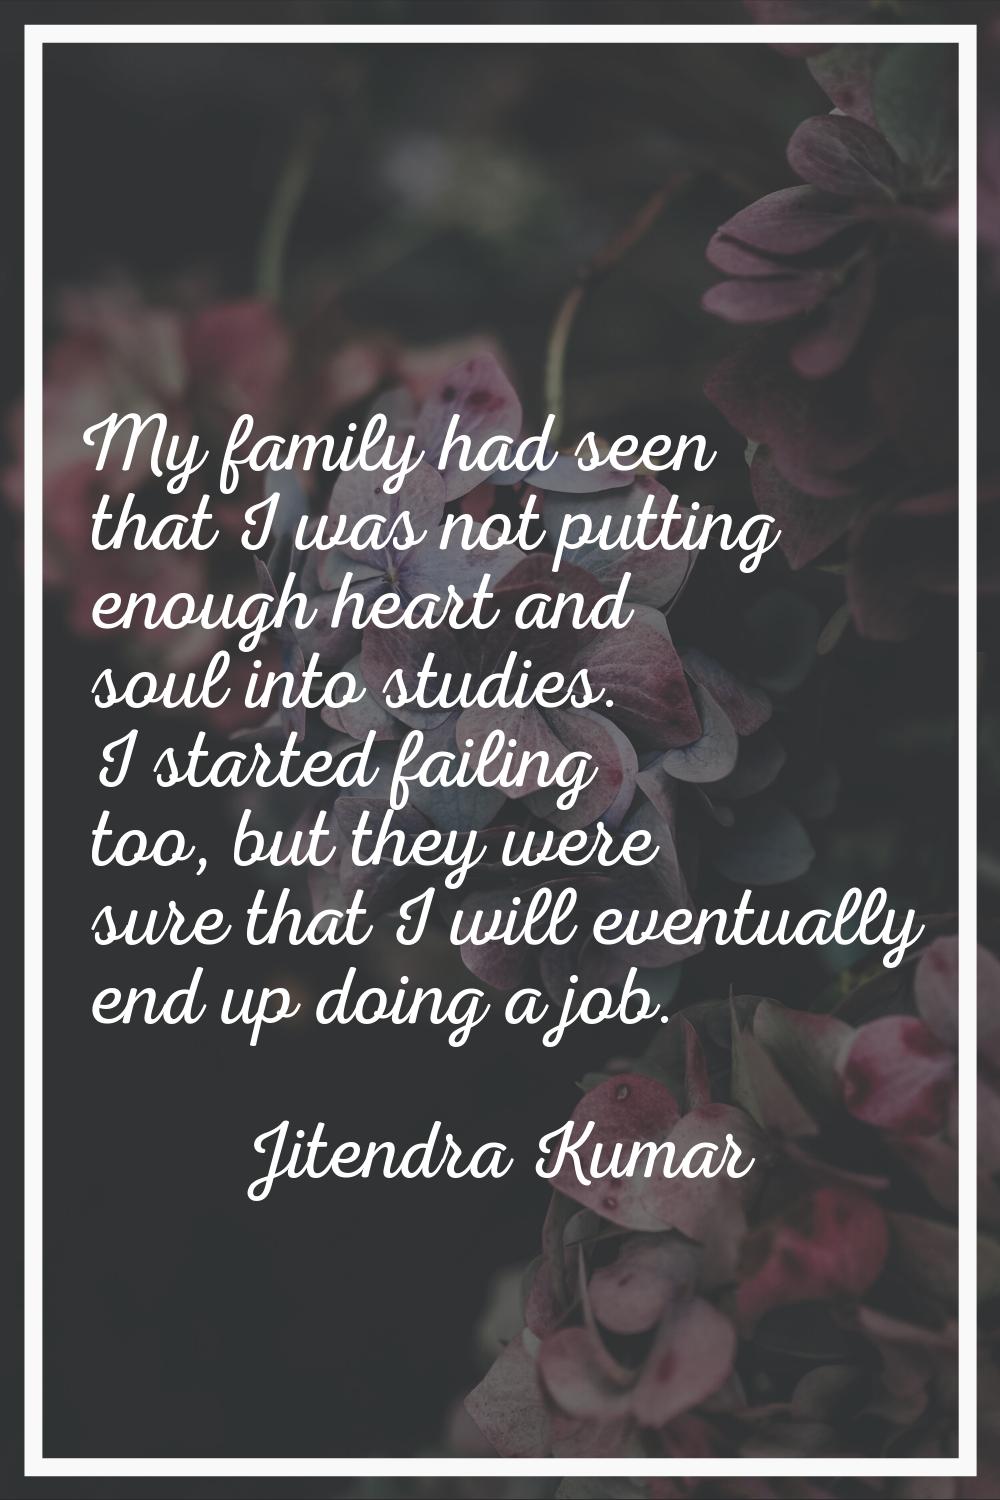 My family had seen that I was not putting enough heart and soul into studies. I started failing too